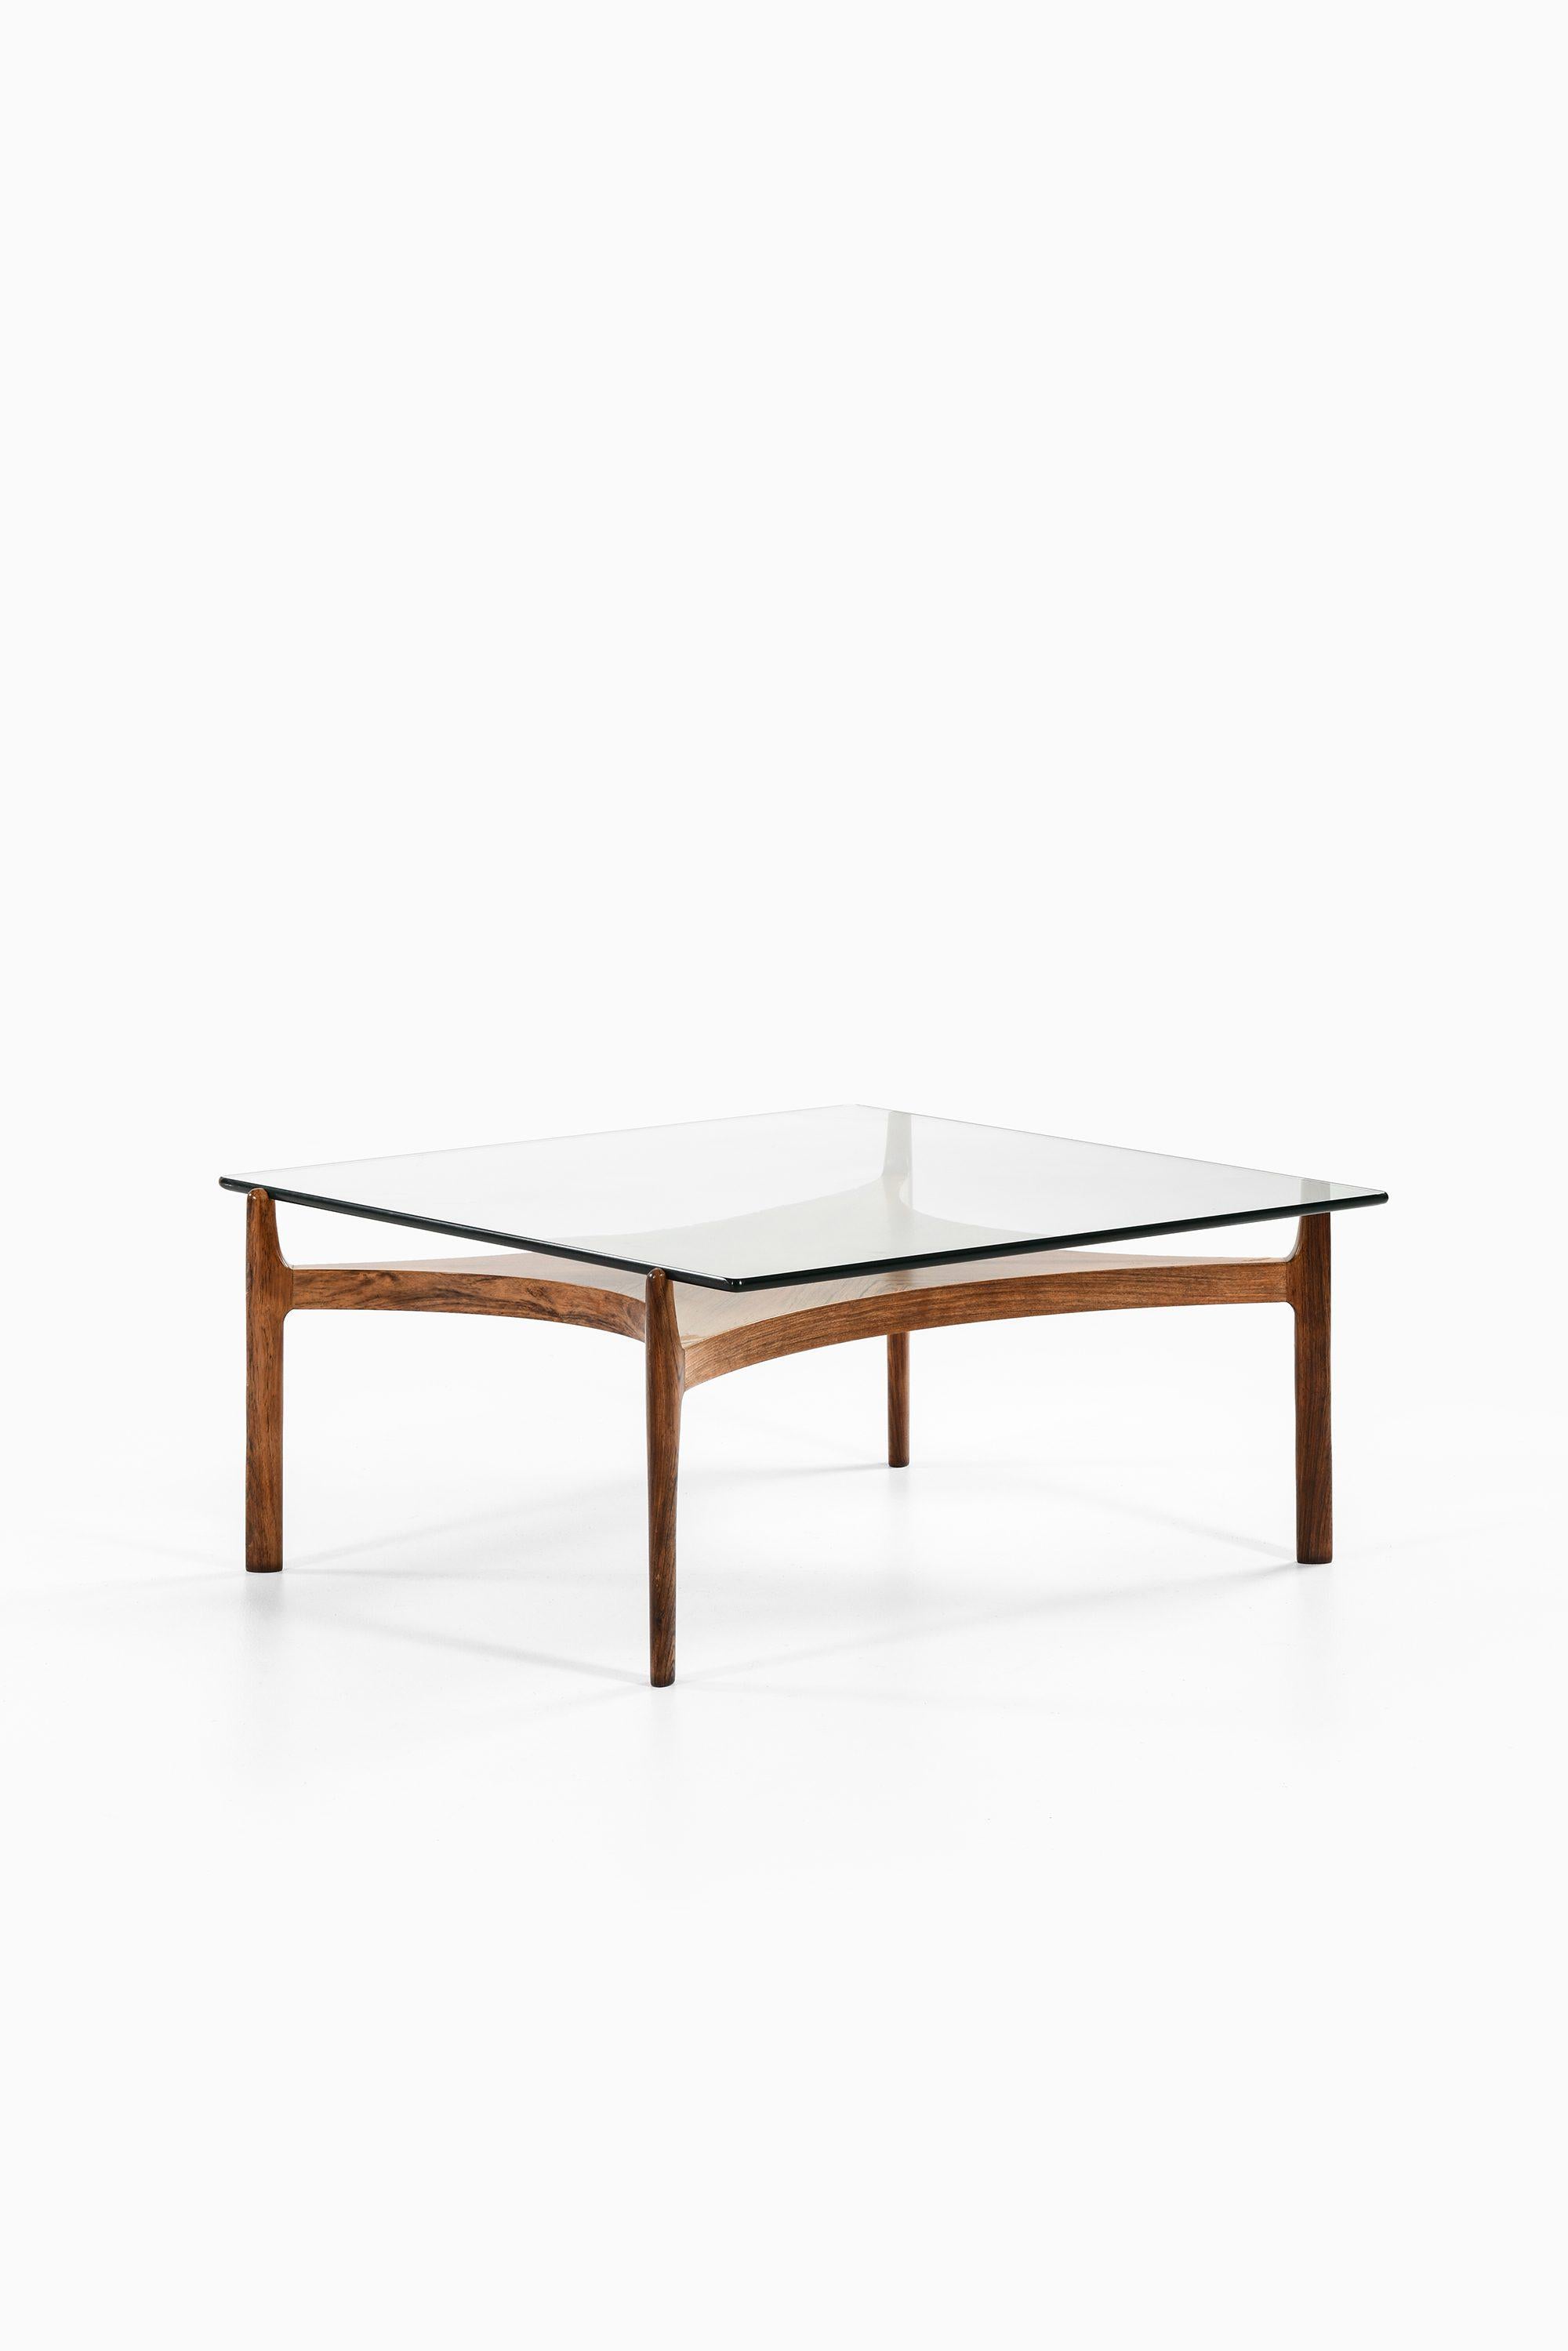 Coffee Table in Rosewood and Glass by Sven Ellekær, 1960's

Additional Information:
Material: Rosewood and glass
Style: Mid century, Scandinavian
Produced by Chr. Linneberg Møbelfabrik in Denmark
Dimensions (W x D x H): 100 x 103 x 46 cm
Condition: